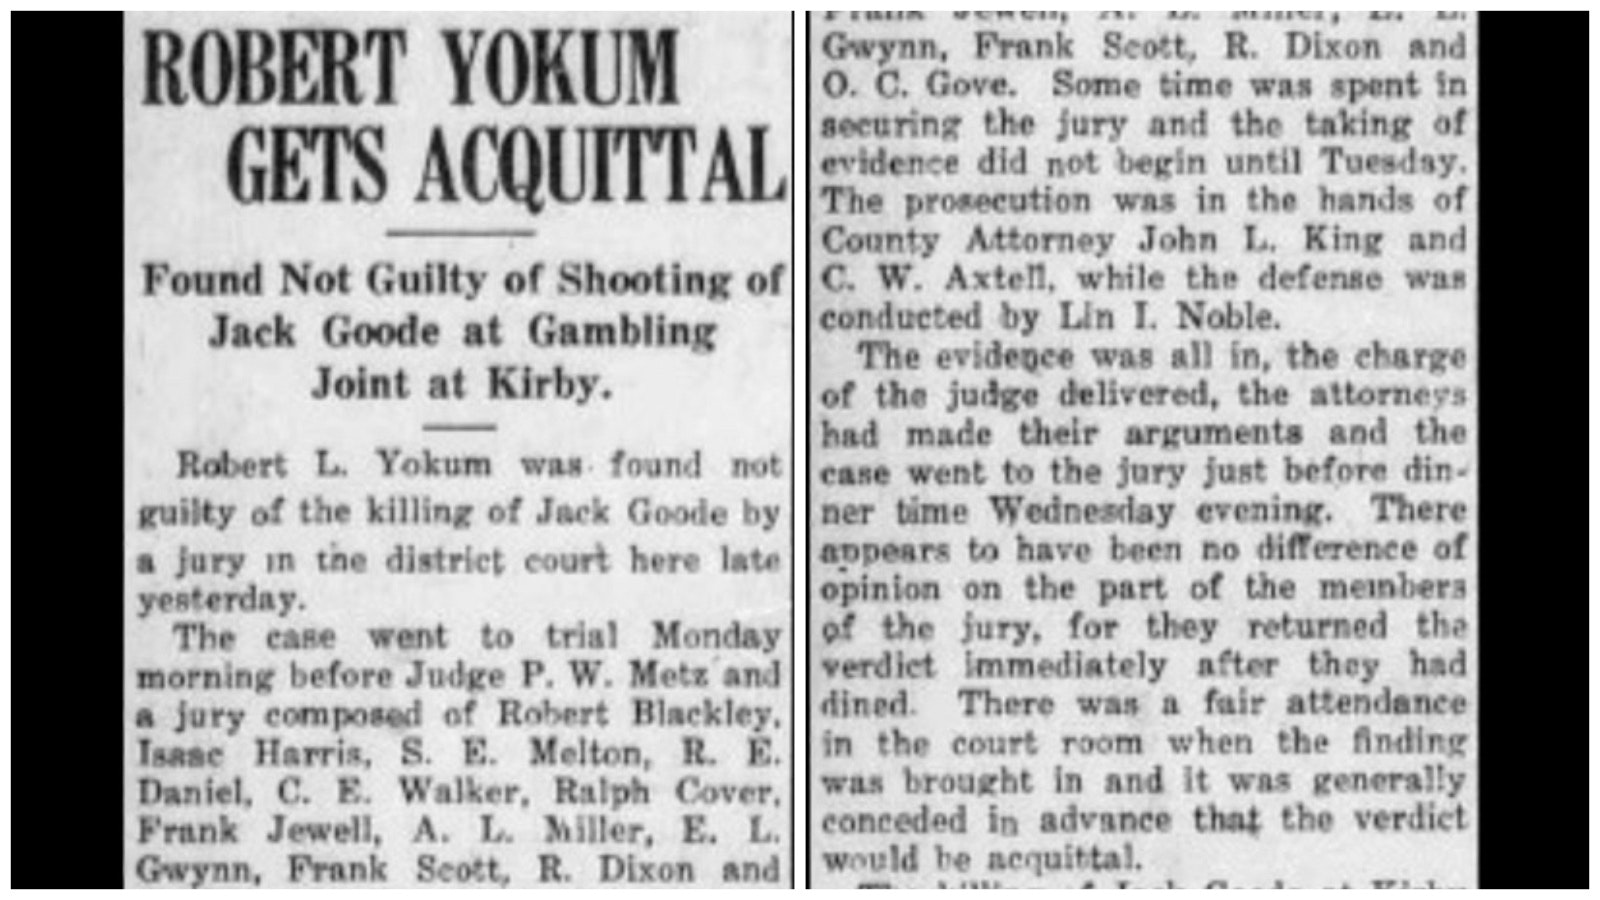 The Thermopolis Record published a story on the acquittal of Robert E. Lee Yokum on March 23, 1922. Yokum had been charged with killing a man outside a gambling game operation.